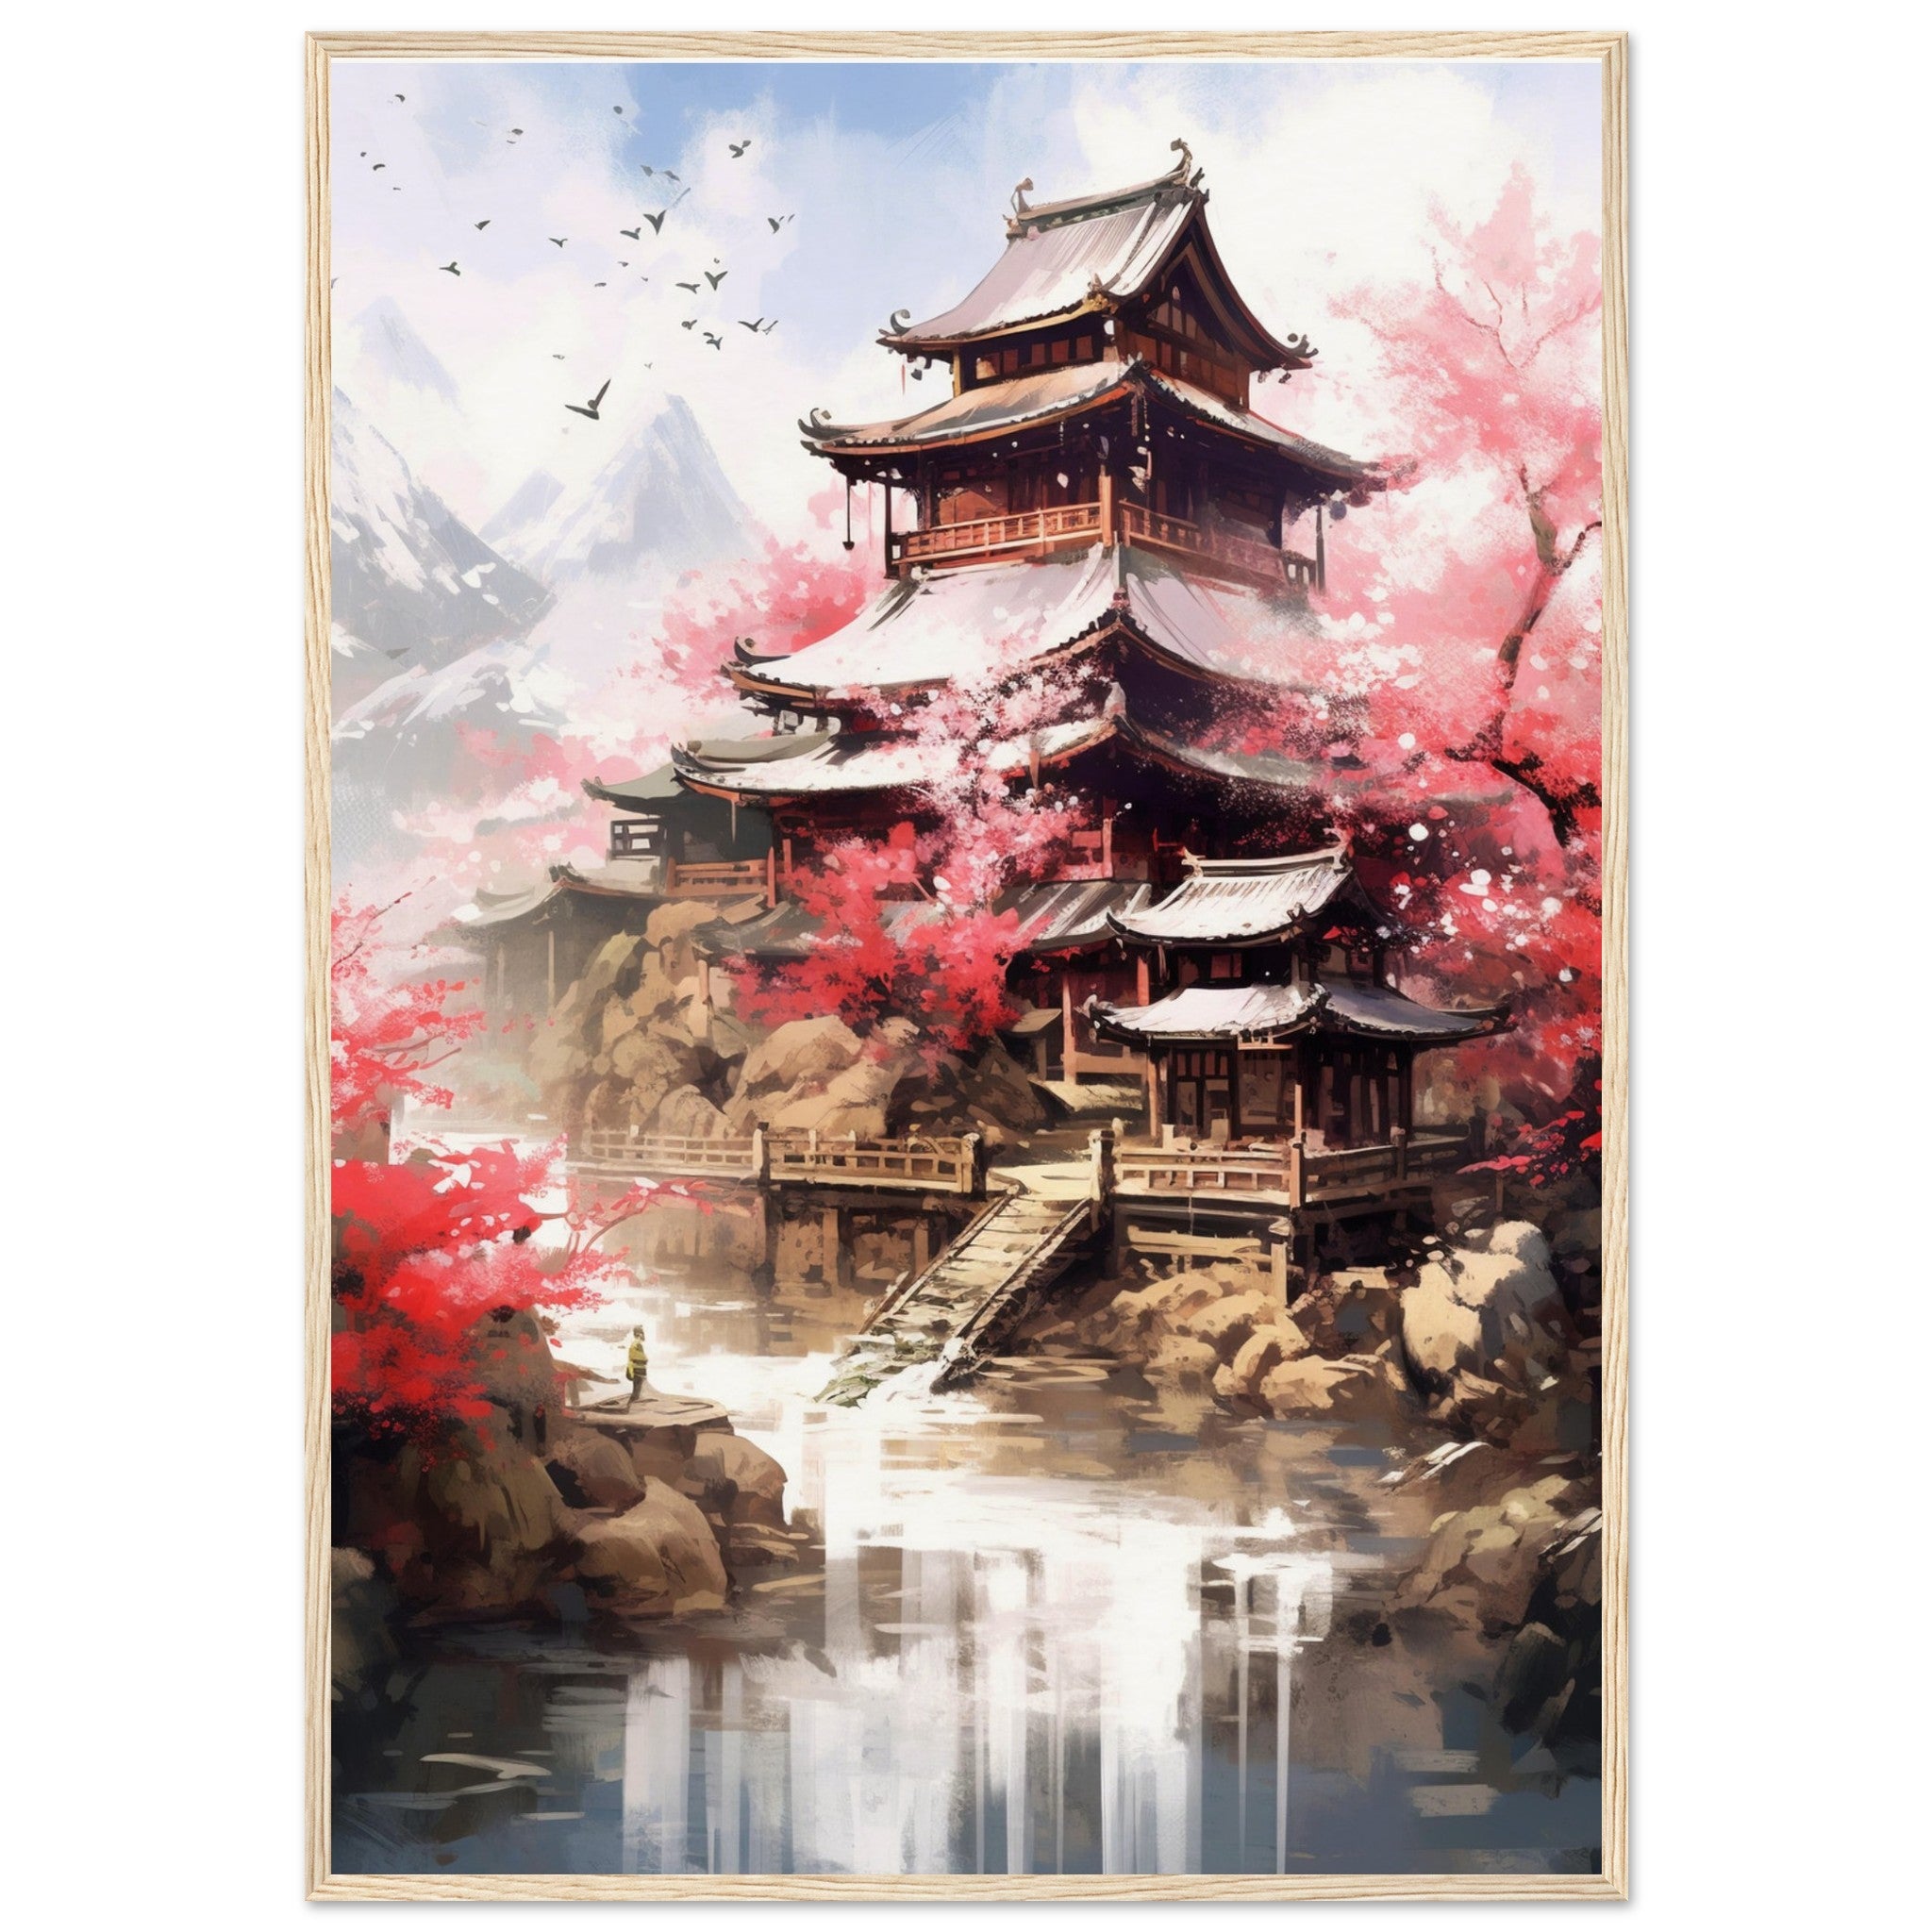 Japanese temple - immersiarts